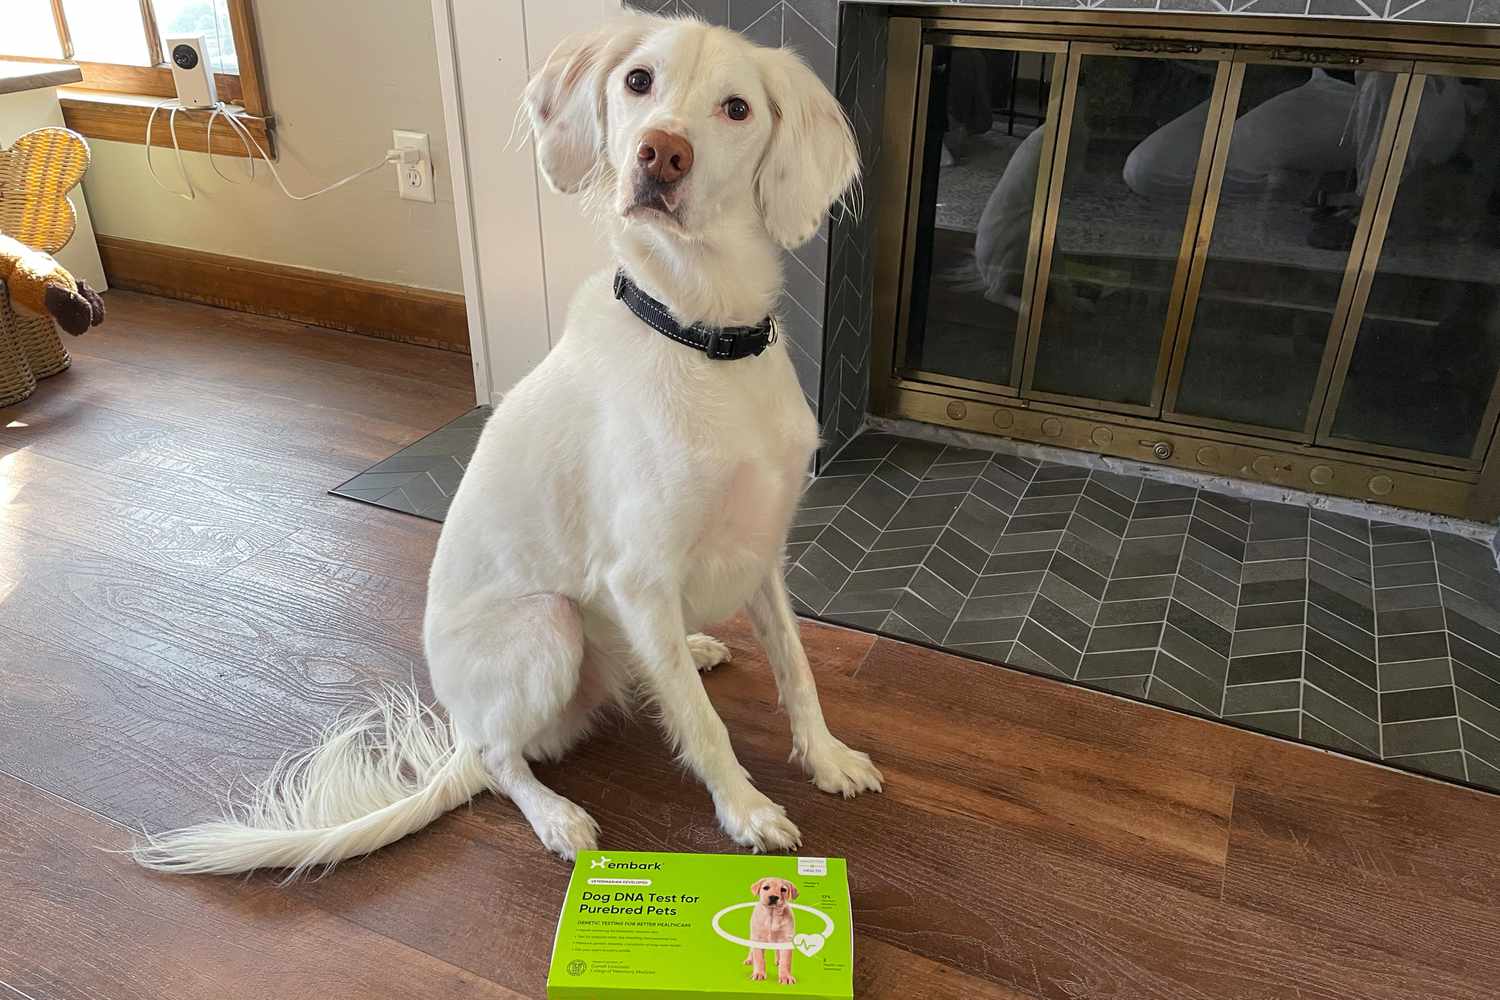 Embark Purebred DNA Test Kit in front of a fireplace and dog sitting on hardwood floor